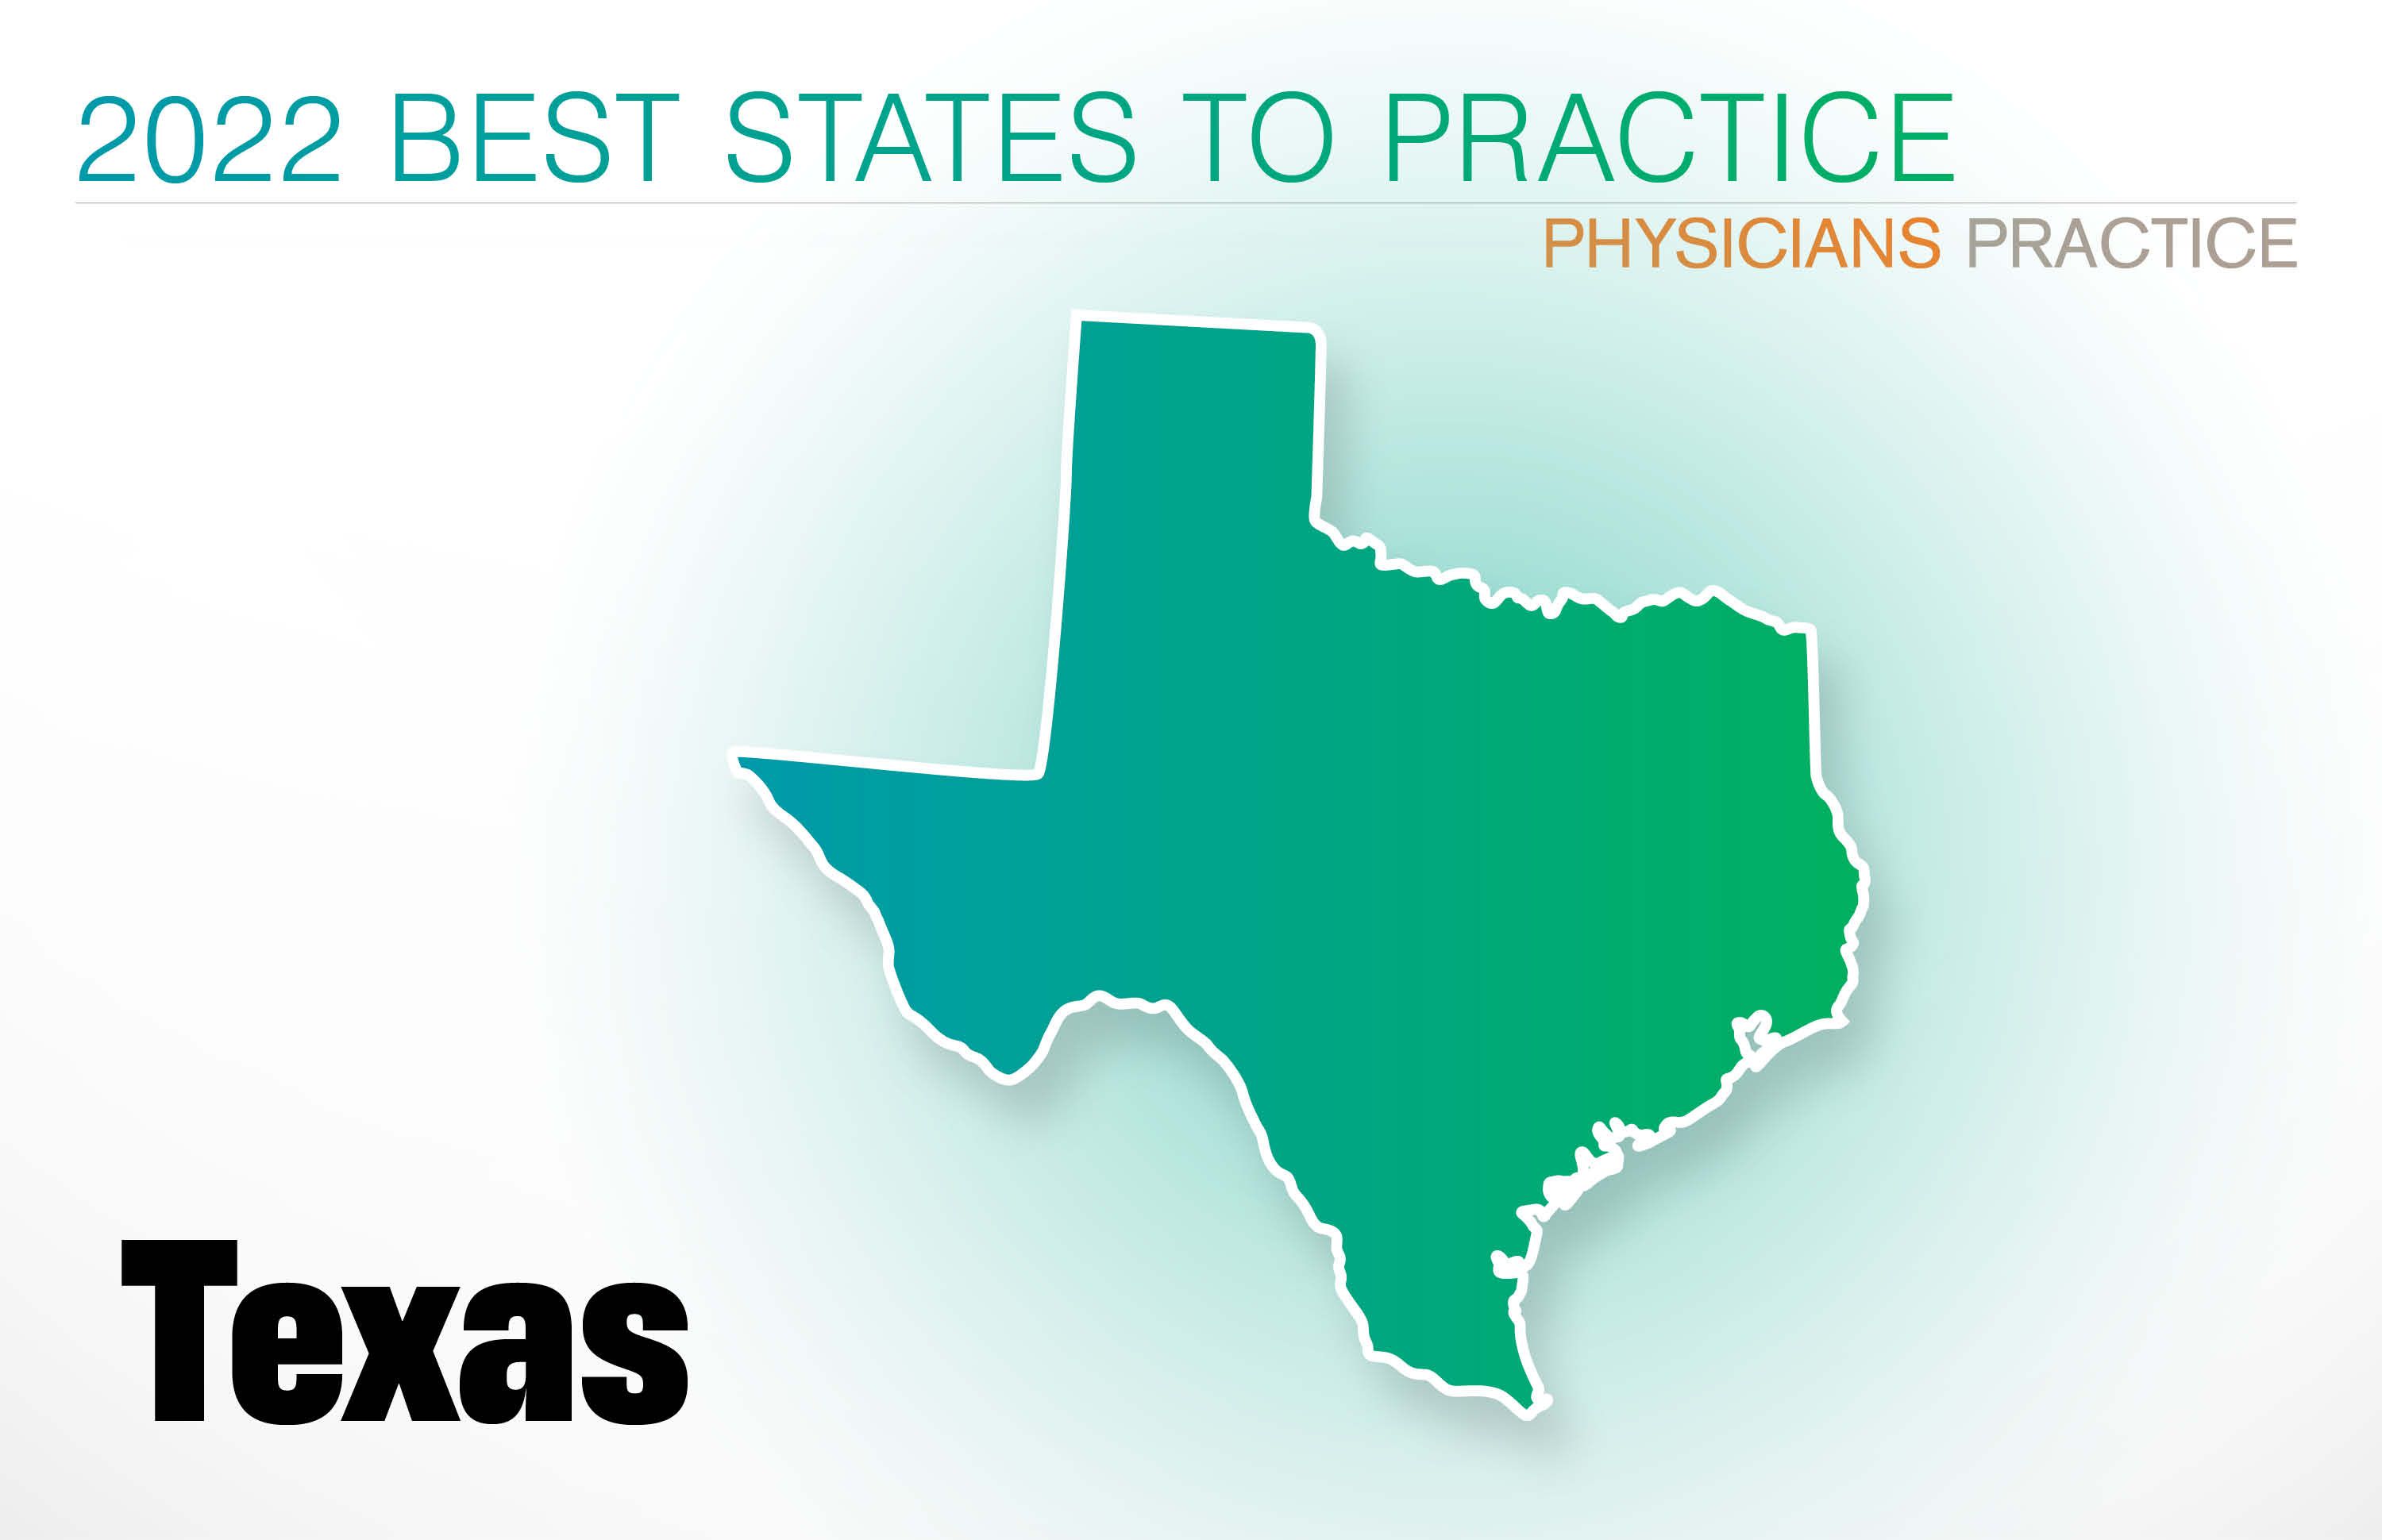 #21 Texas Rankings: Cost of living: 16 Physician density: 10 Amount of state business taxes collected: 14 Average malpractice insurance rates: 38 Quality of life: 34 GPCI: 17